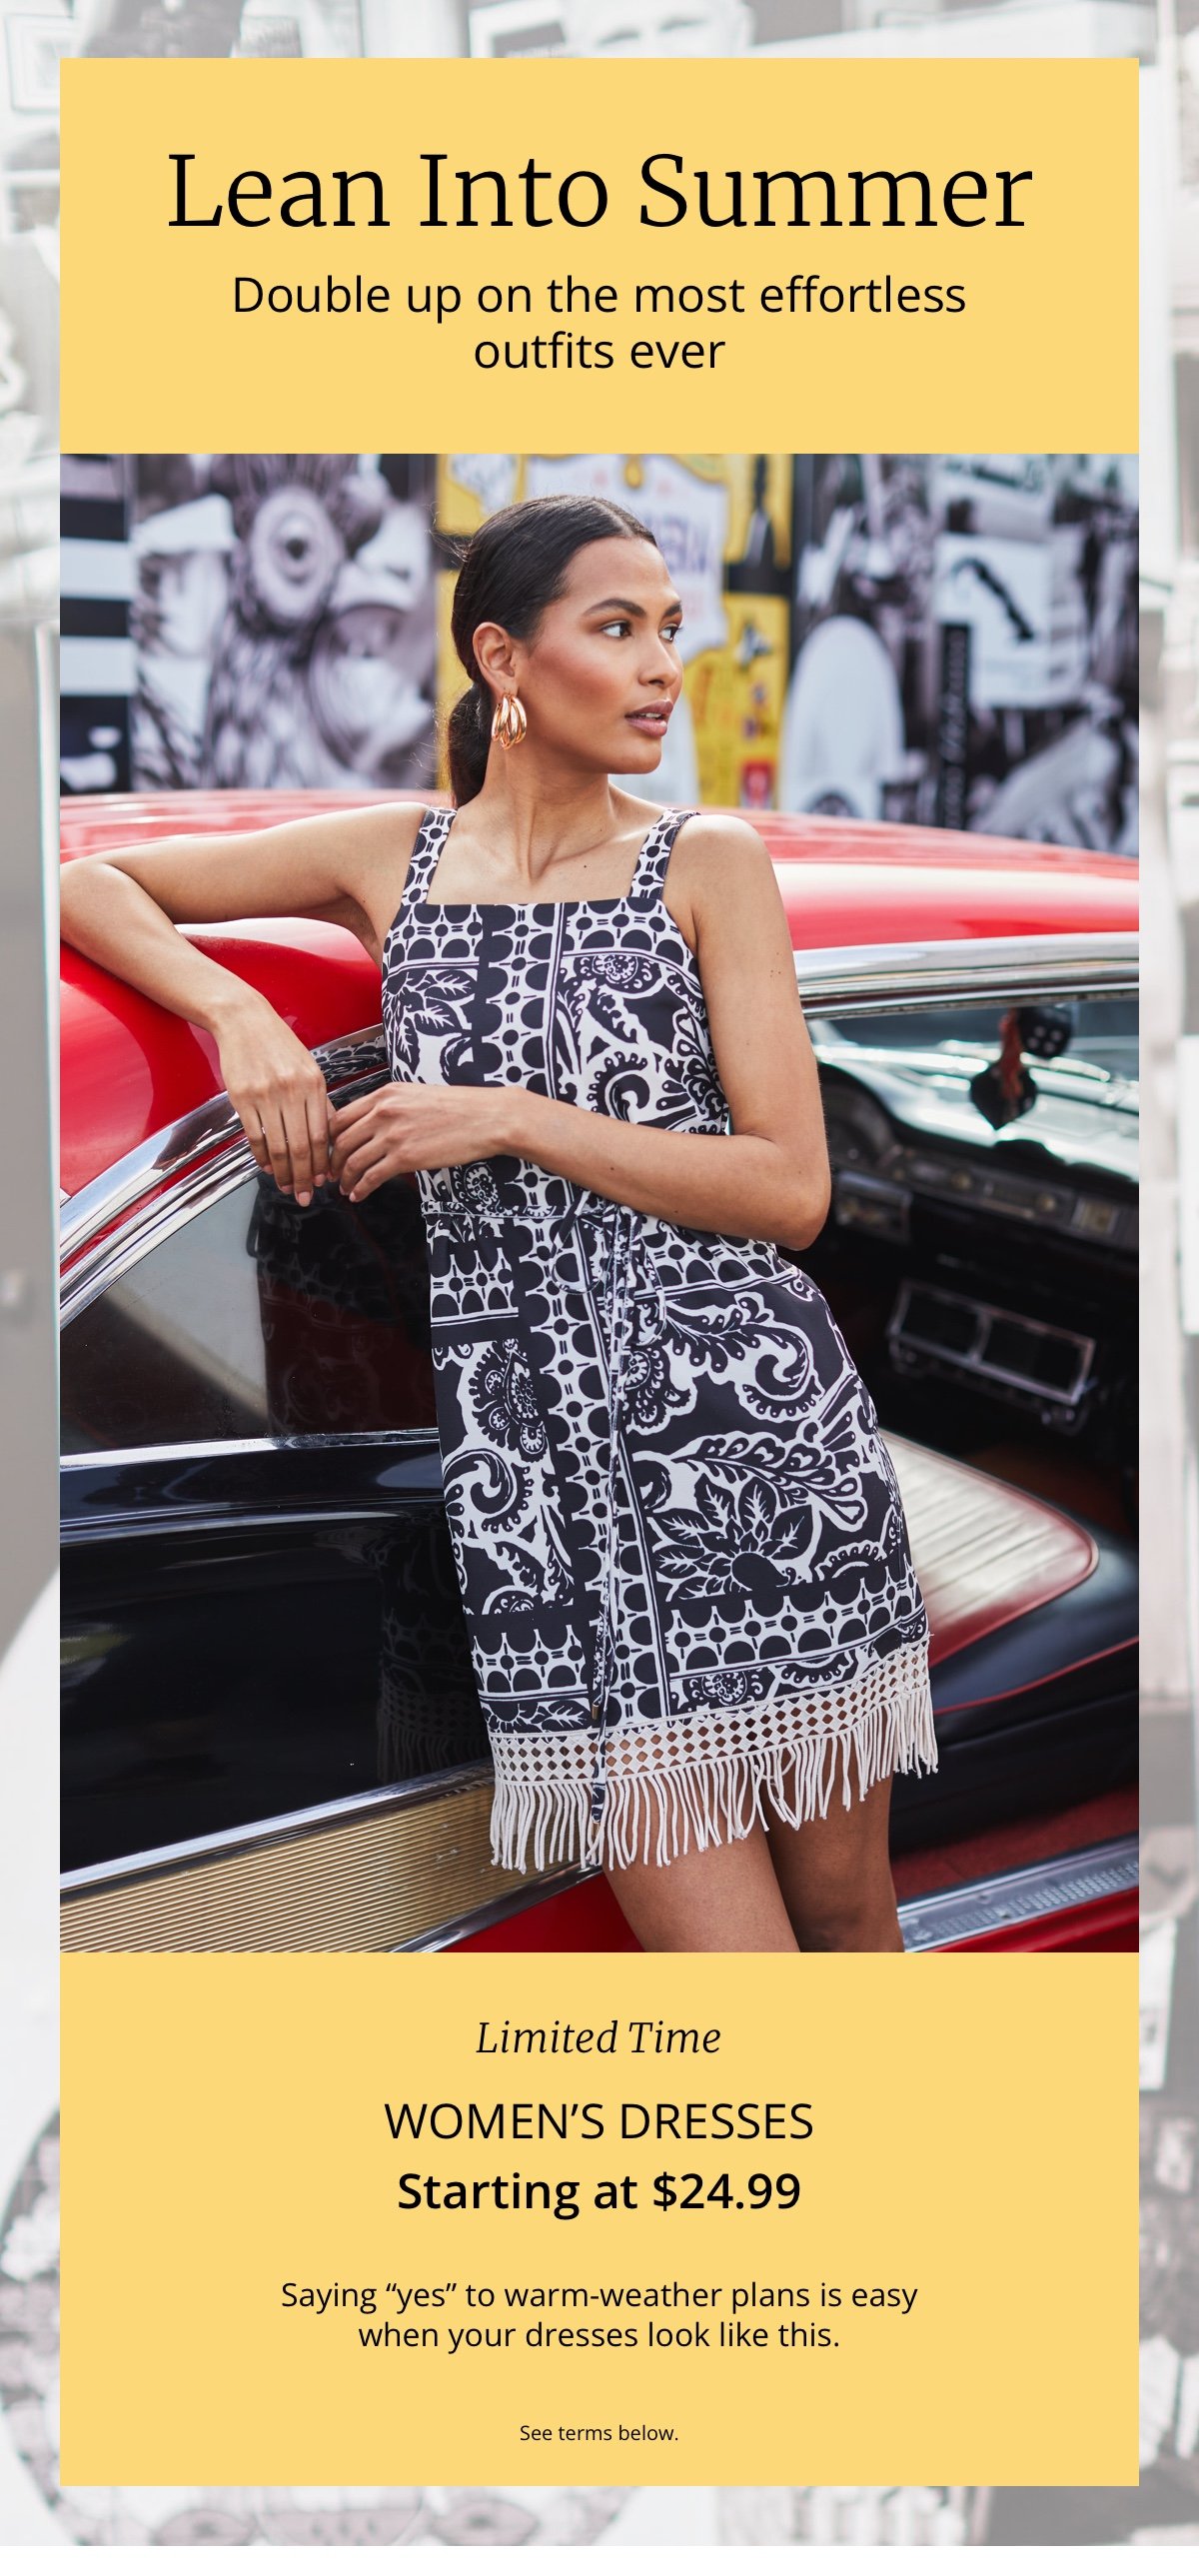 Lean Into Summer|Double up on the most effortless outfits ever|Limited Time|Women’s Dresses|Starting at \\$24.99|Saying “yes” to warm-weather plans is easy| when your dresses look like this.|See terms below.